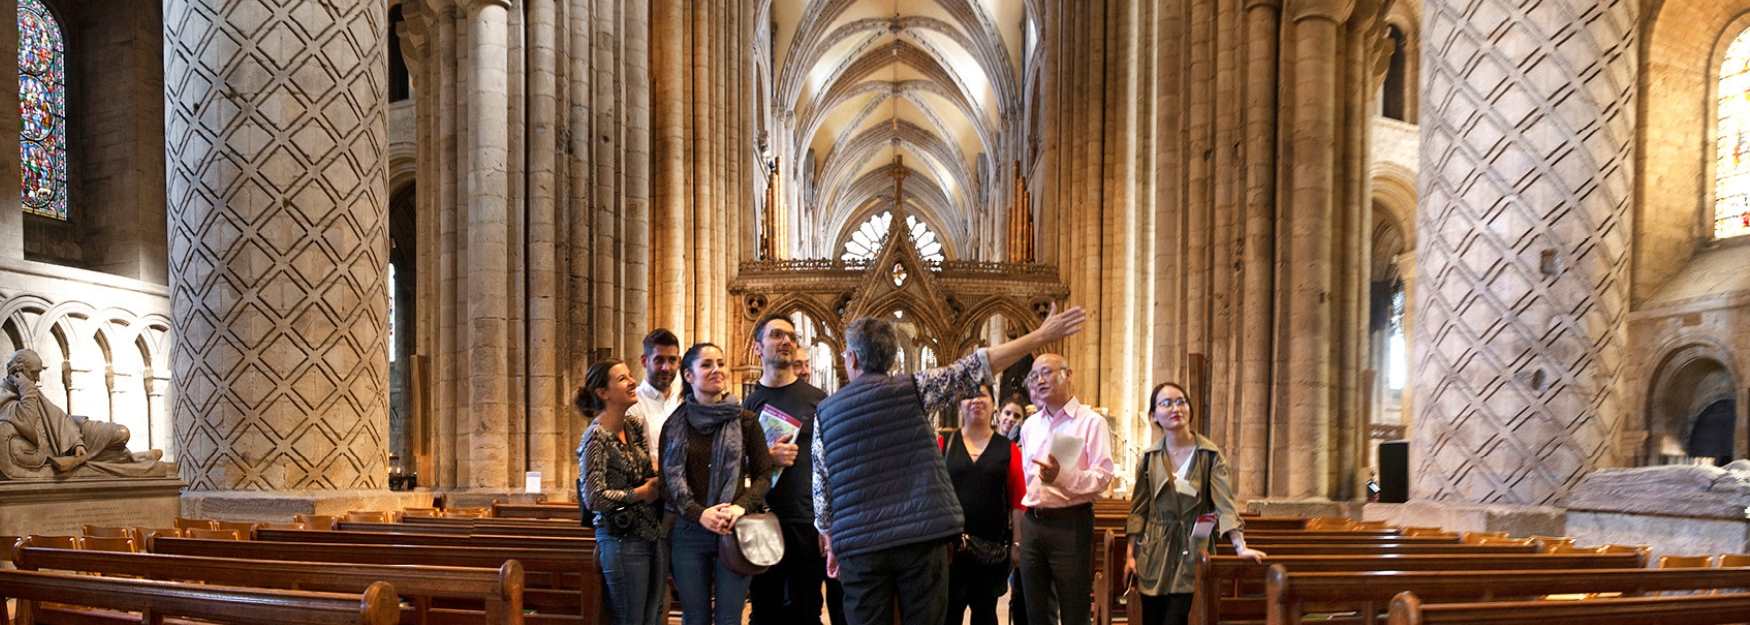 People standing inside Durham Cathedral